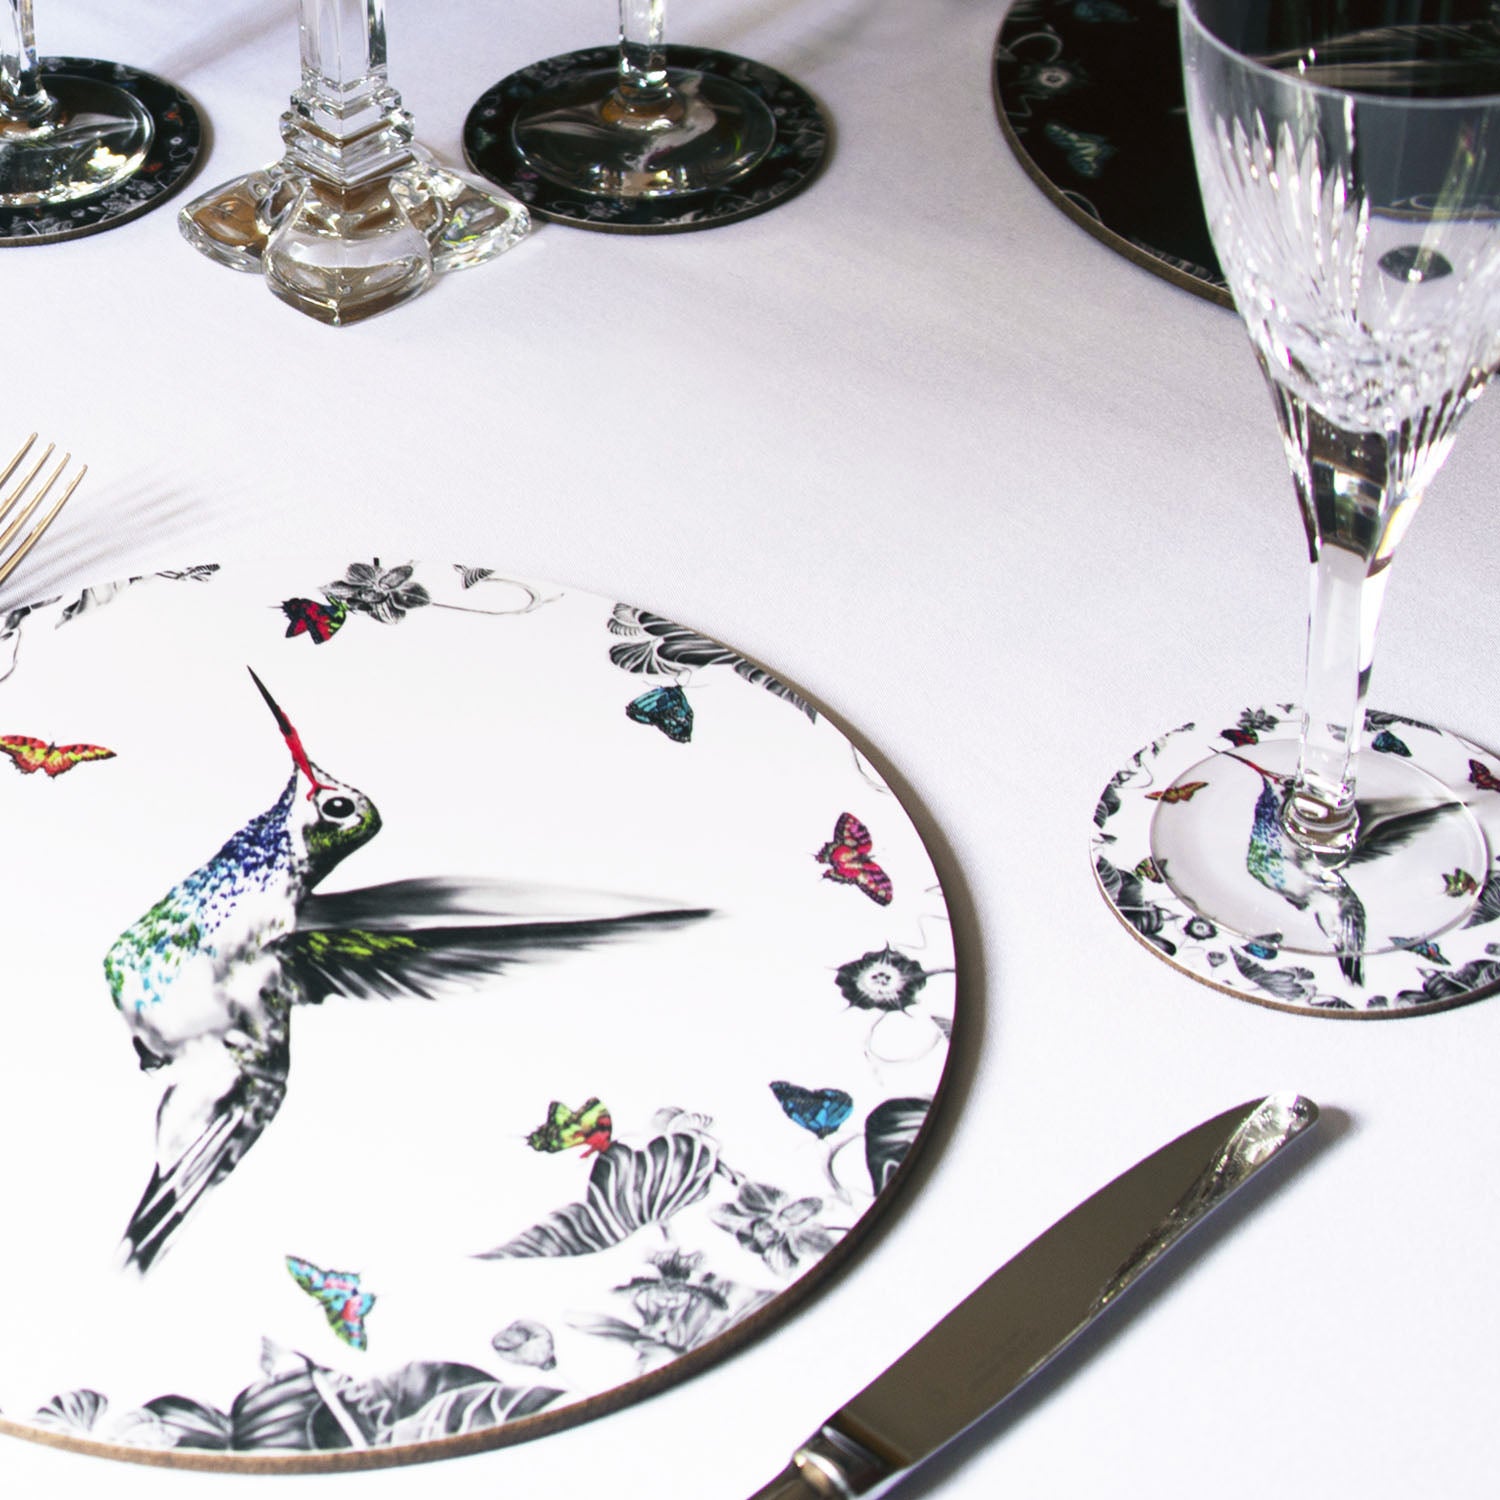 White hummingbird placemat on the table